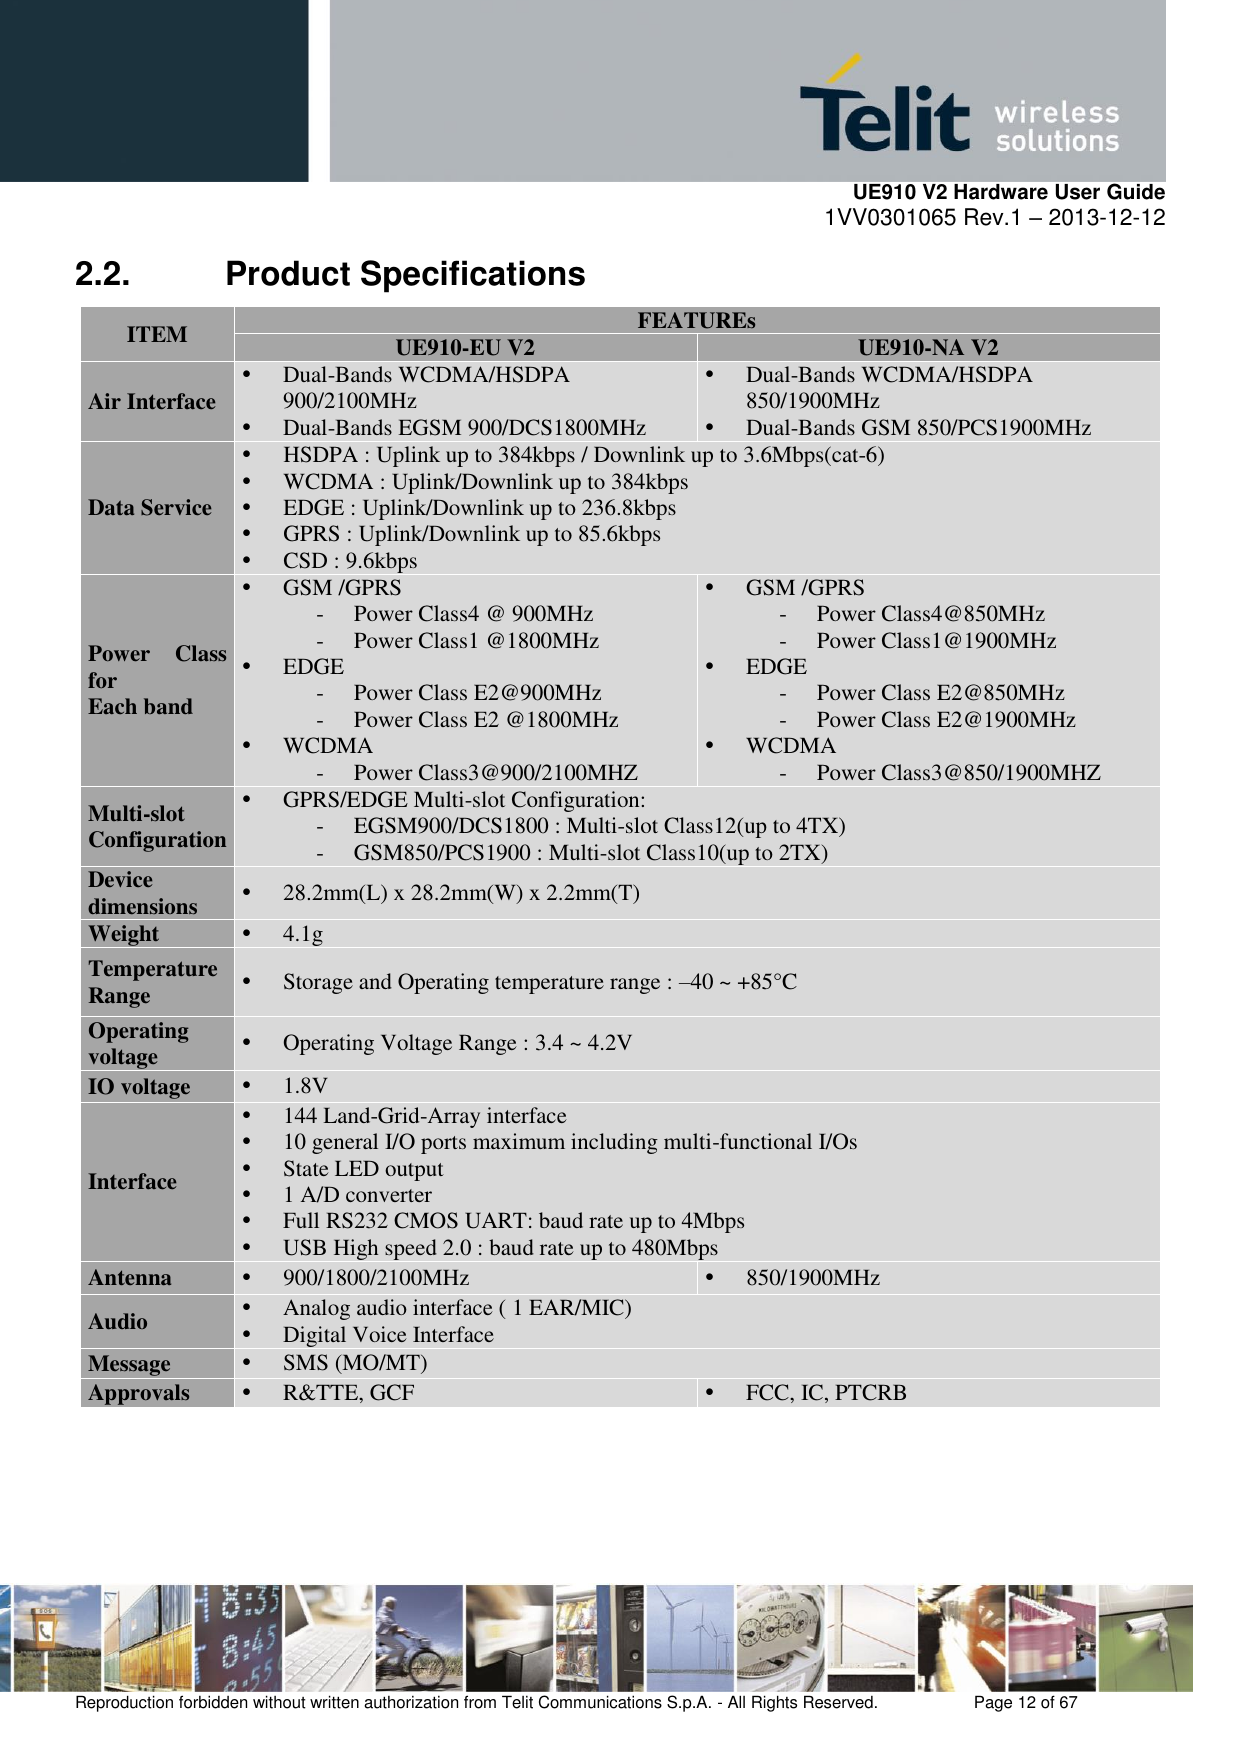     UE910 V2 Hardware User Guide 1VV0301065 Rev.1 – 2013-12-12  Reproduction forbidden without written authorization from Telit Communications S.p.A. - All Rights Reserved.    Page 12 of 67                                                     2.2.  Product Specifications  ITEM FEATUREs UE910-EU V2 UE910-NA V2 Air Interface  Dual-Bands WCDMA/HSDPA 900/2100MHz  Dual-Bands EGSM 900/DCS1800MHz  Dual-Bands WCDMA/HSDPA 850/1900MHz  Dual-Bands GSM 850/PCS1900MHz Data Service  HSDPA : Uplink up to 384kbps / Downlink up to 3.6Mbps(cat-6)  WCDMA : Uplink/Downlink up to 384kbps  EDGE : Uplink/Downlink up to 236.8kbps  GPRS : Uplink/Downlink up to 85.6kbps  CSD : 9.6kbps Power  Class for Each band  GSM /GPRS - Power Class4 @ 900MHz - Power Class1 @1800MHz  EDGE - Power Class E2@900MHz - Power Class E2 @1800MHz  WCDMA  - Power Class3@900/2100MHZ  GSM /GPRS - Power Class4@850MHz - Power Class1@1900MHz  EDGE - Power Class E2@850MHz - Power Class E2@1900MHz  WCDMA  - Power Class3@850/1900MHZ Multi-slot Configuration  GPRS/EDGE Multi-slot Configuration: - EGSM900/DCS1800 : Multi-slot Class12(up to 4TX) - GSM850/PCS1900 : Multi-slot Class10(up to 2TX) Device dimensions   28.2mm(L) x 28.2mm(W) x 2.2mm(T) Weight  4.1g Temperature Range  Storage and Operating temperature range : –40 ~ +85°C Operating voltage  Operating Voltage Range : 3.4 ~ 4.2V IO voltage  1.8V Interface  144 Land-Grid-Array interface  10 general I/O ports maximum including multi-functional I/Os  State LED output  1 A/D converter  Full RS232 CMOS UART: baud rate up to 4Mbps  USB High speed 2.0 : baud rate up to 480Mbps Antenna  900/1800/2100MHz  850/1900MHz Audio  Analog audio interface ( 1 EAR/MIC)  Digital Voice Interface Message  SMS (MO/MT) Approvals  R&amp;TTE, GCF  FCC, IC, PTCRB  